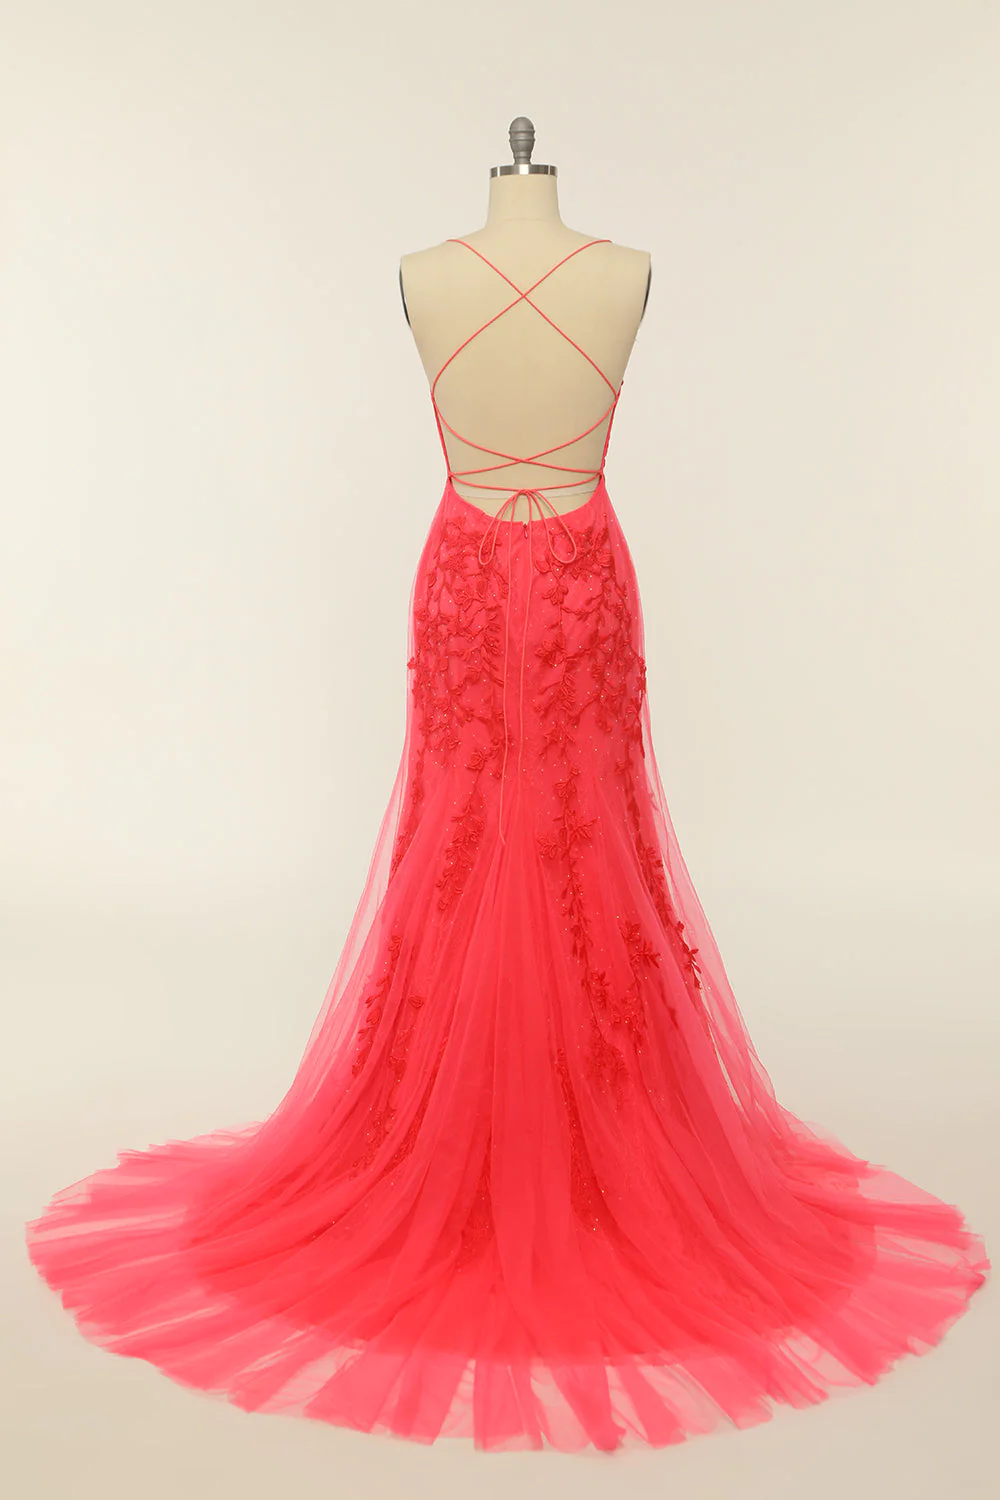 Mermaid Spaghetti Straps Light Pink Long Prom Dress with Appliques Y2316